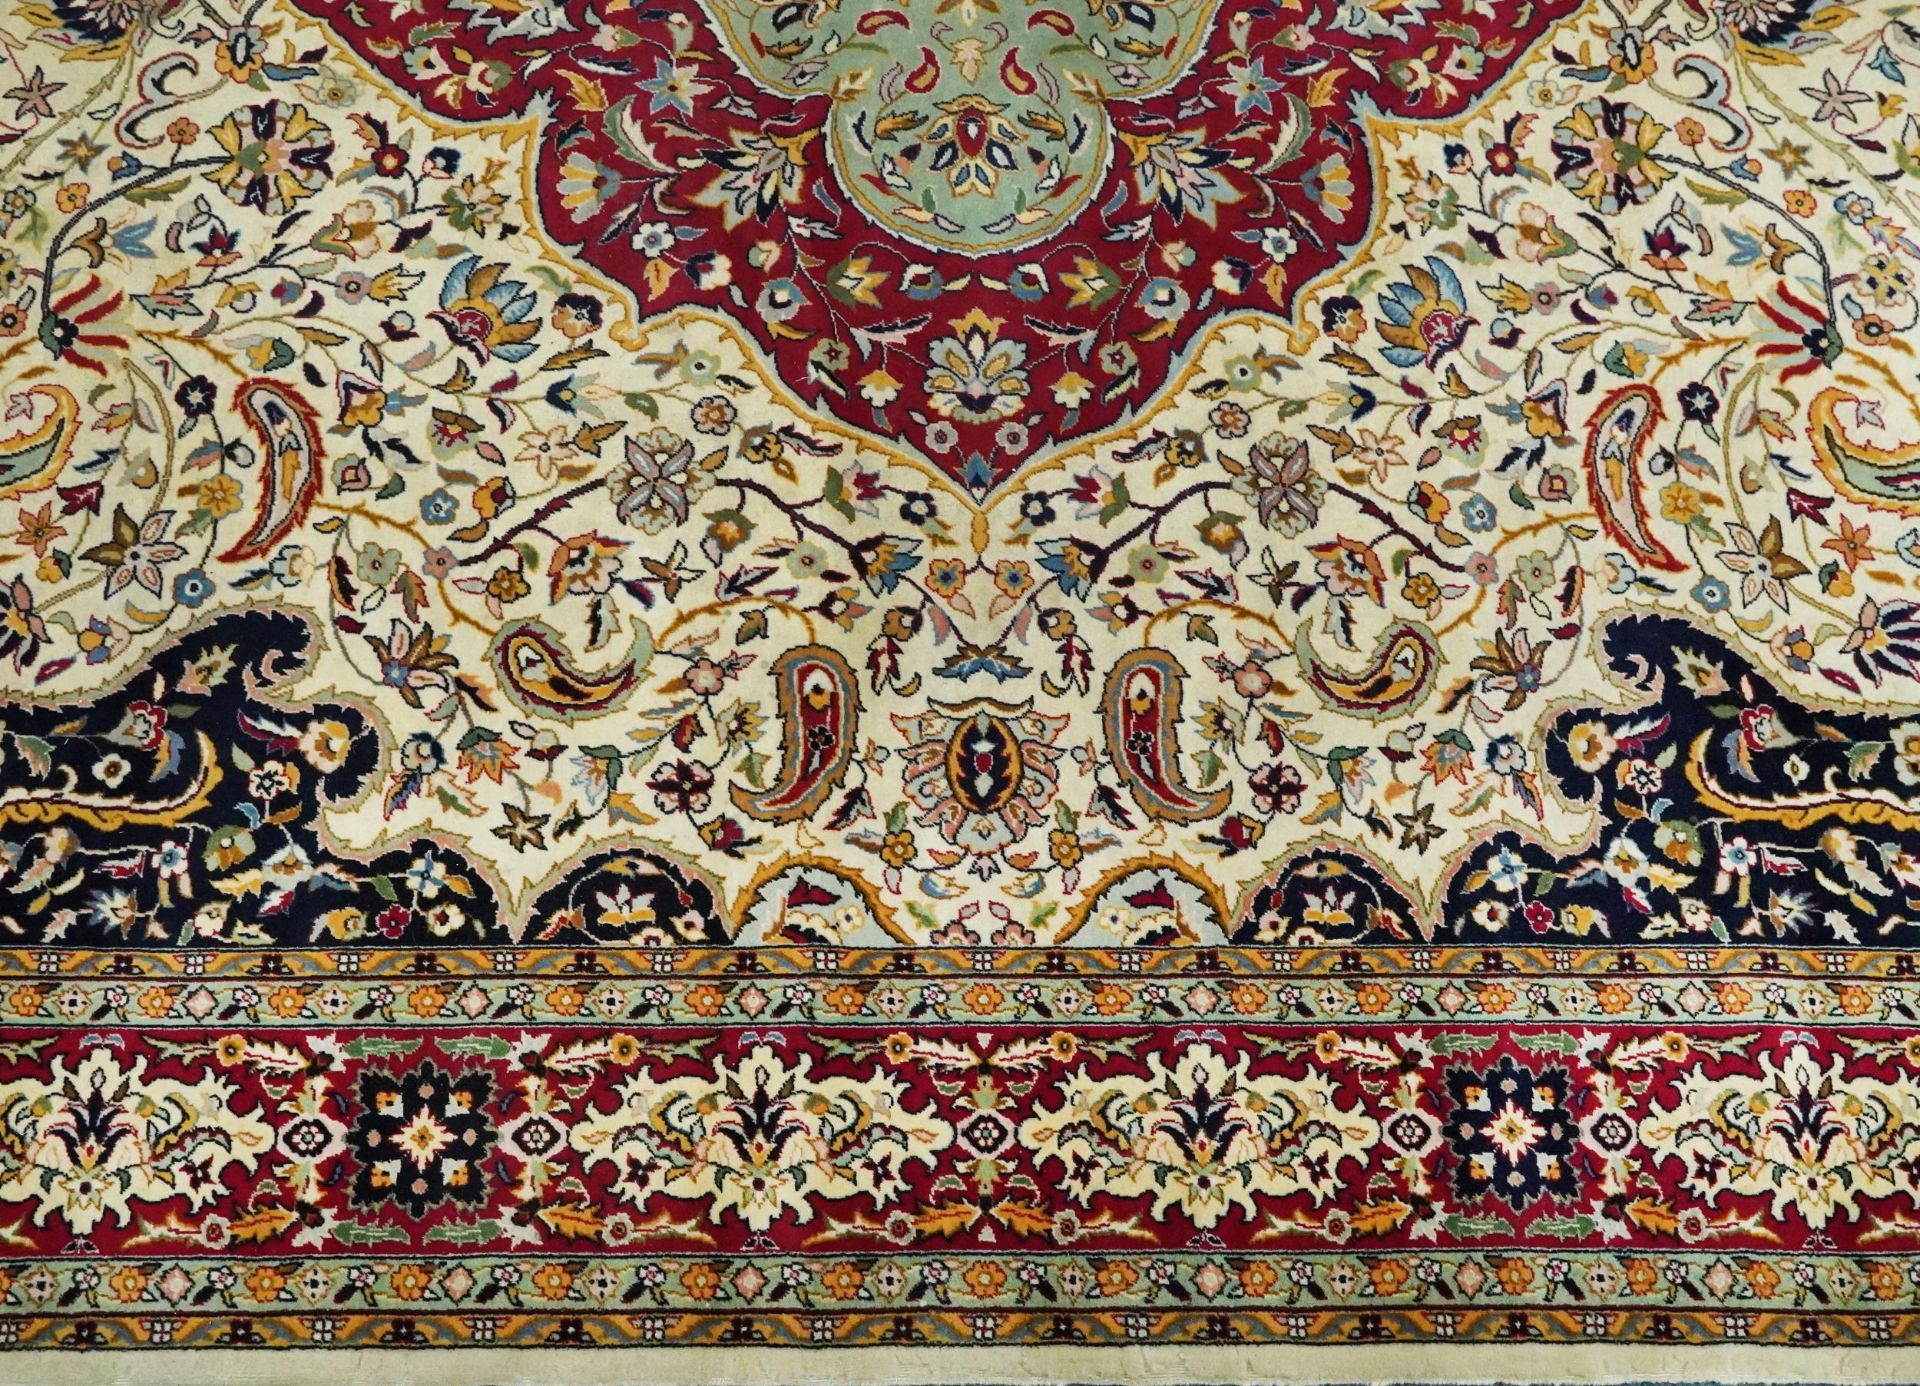 Rectangular Persian cream and red ground rug having an all over repeat floral design, 370cm x 270cm - Image 9 of 12